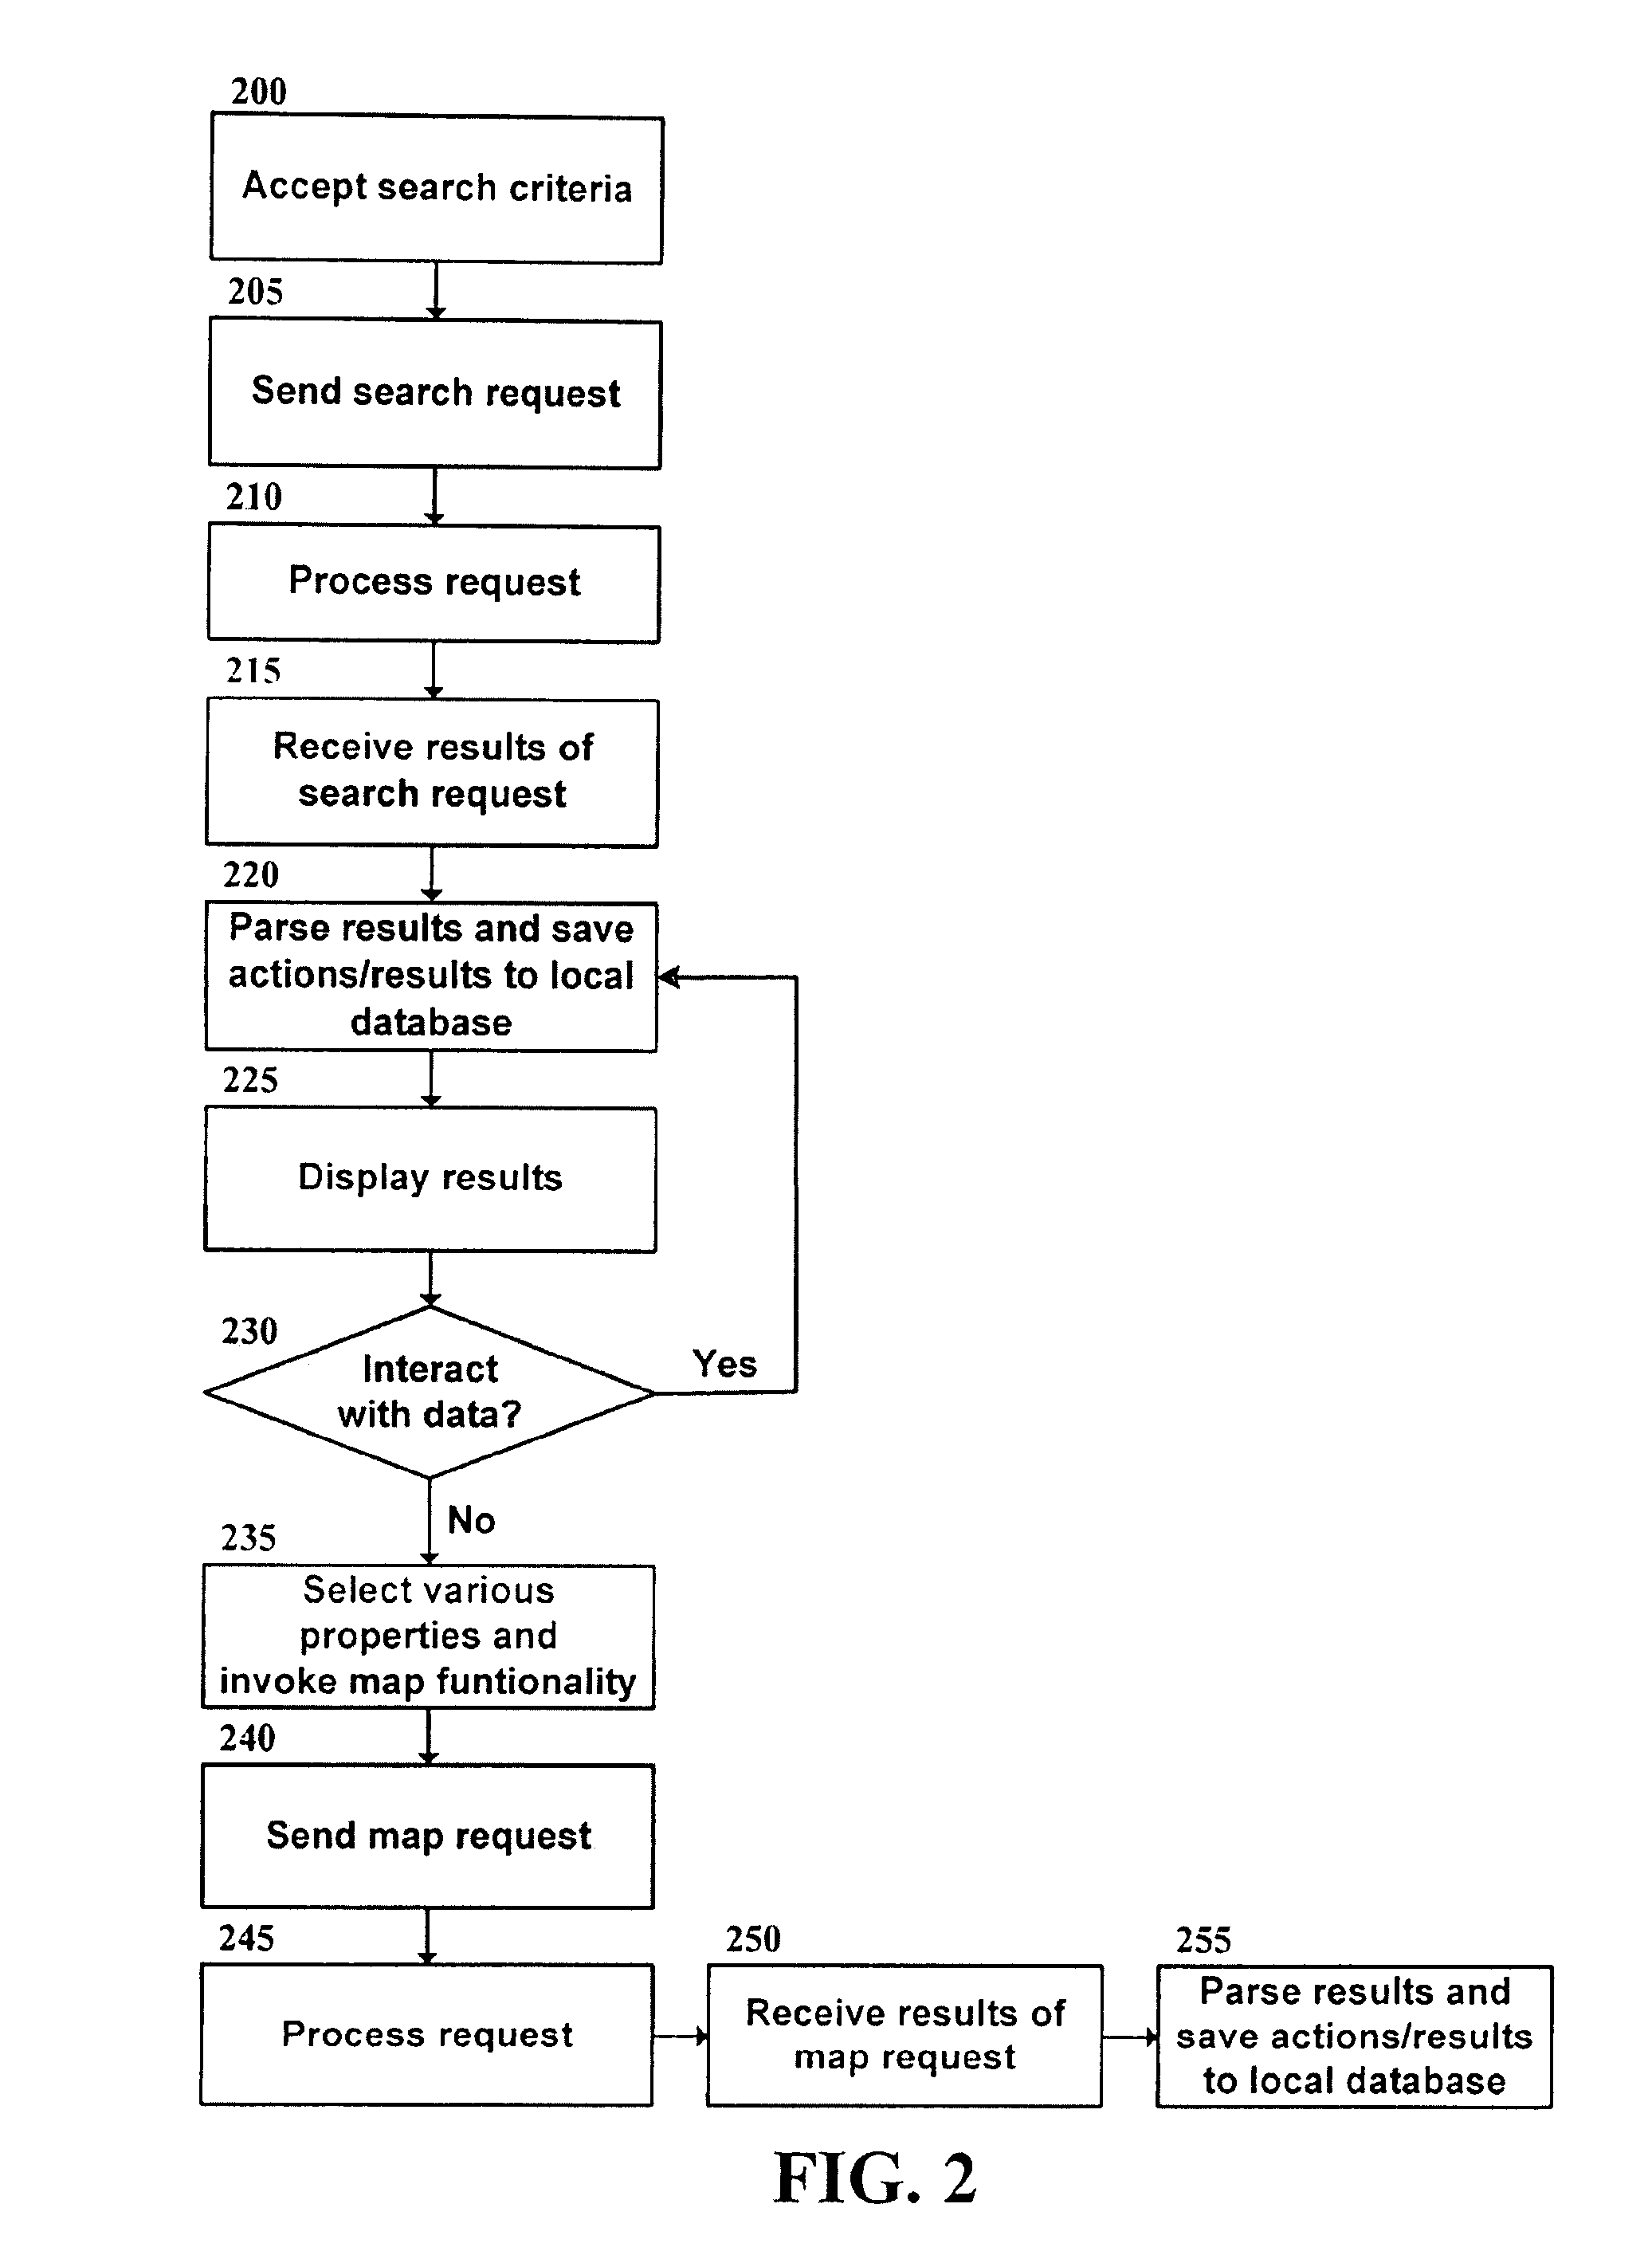 System and method of researching real estate